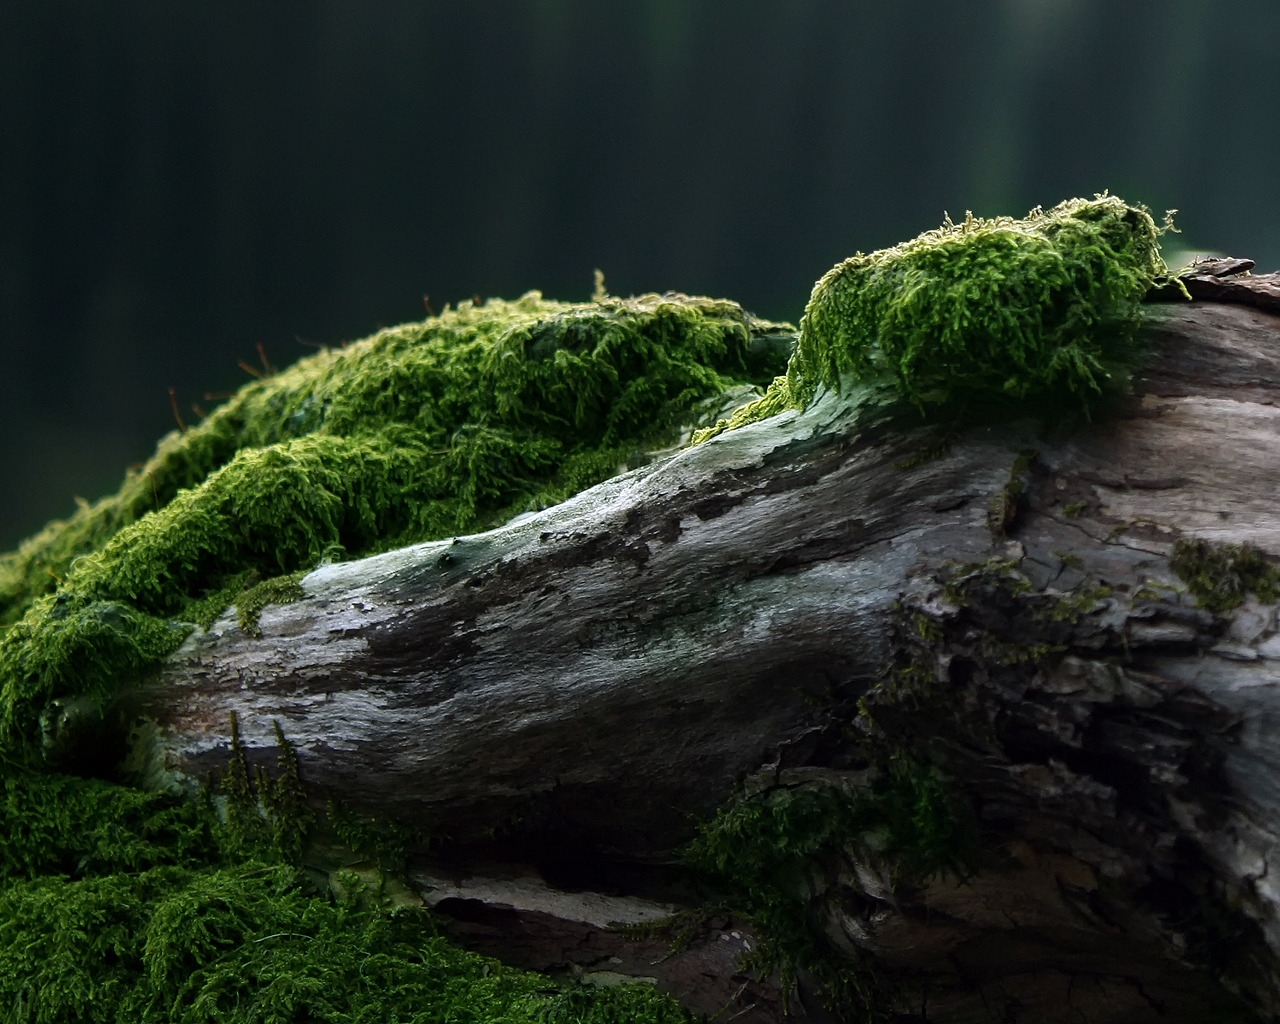 Moss for 1280 x 1024 resolution